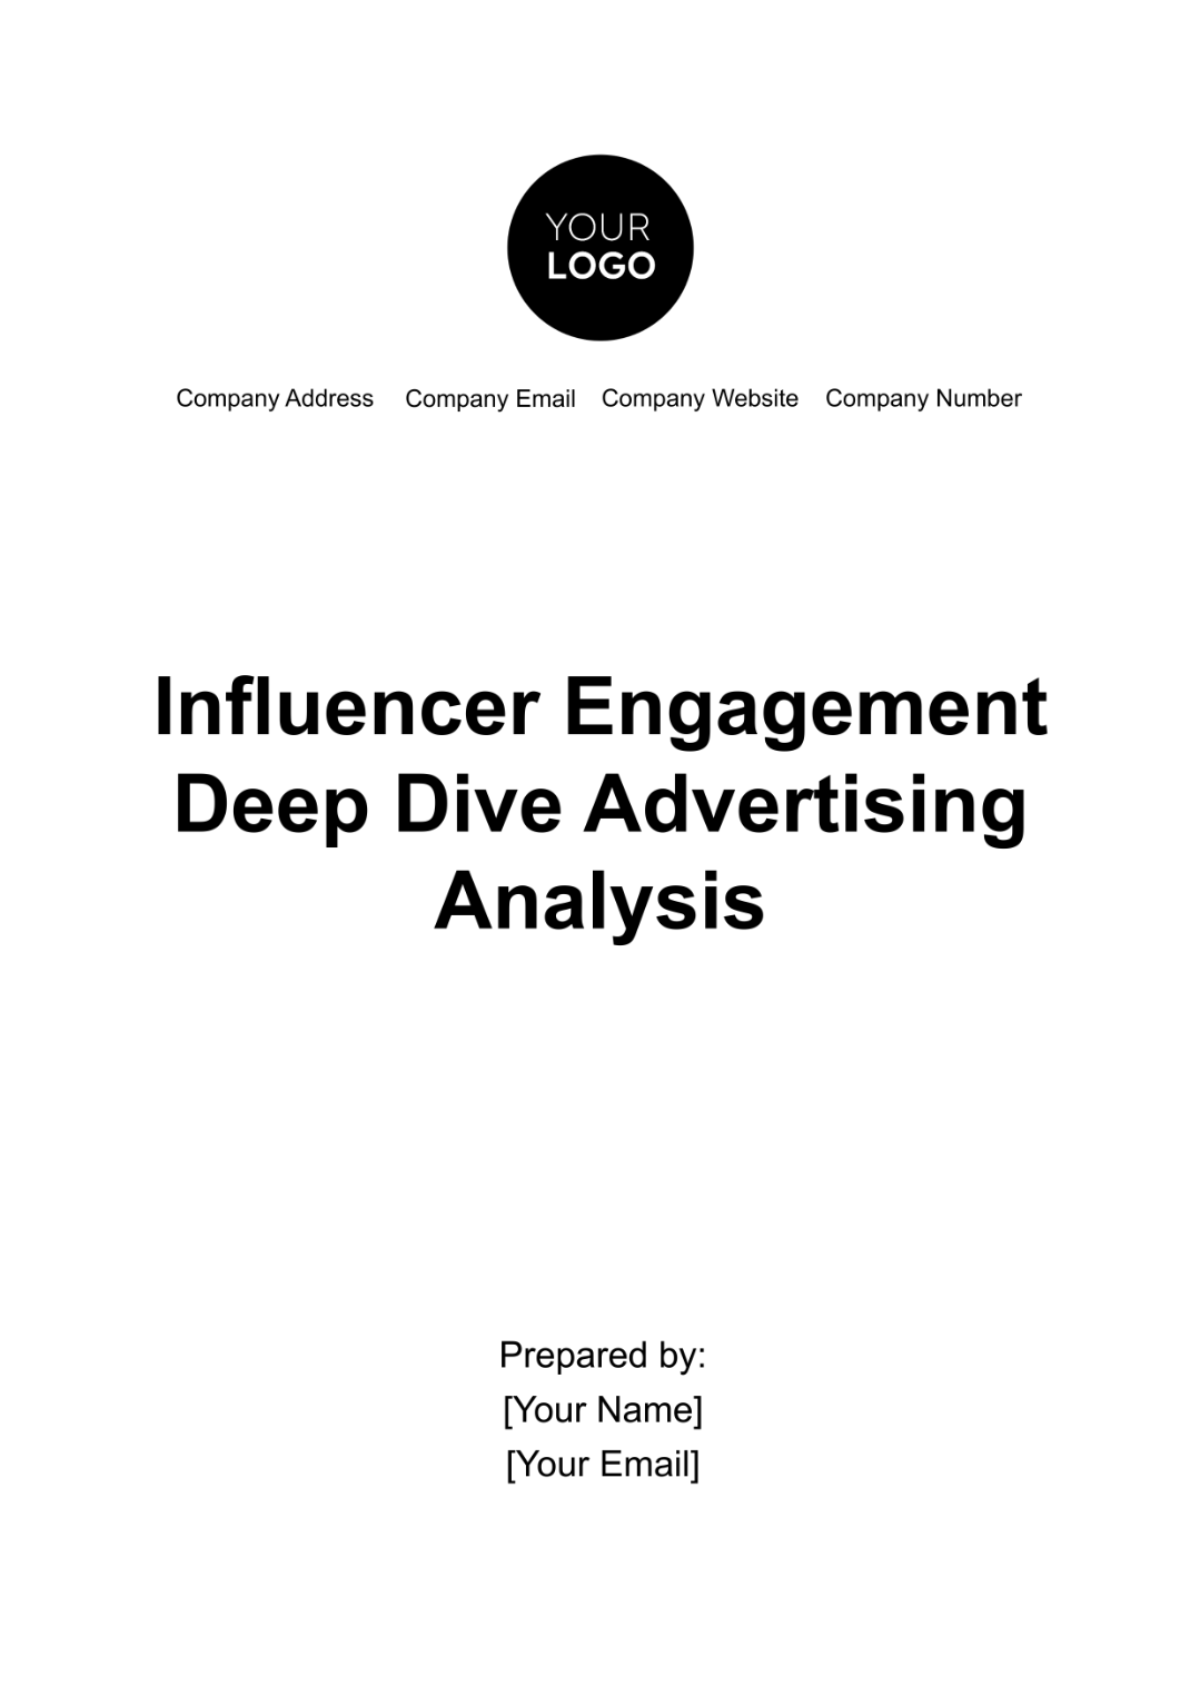 Free Influencer Engagement Deep Dive Advertising Analysis Template